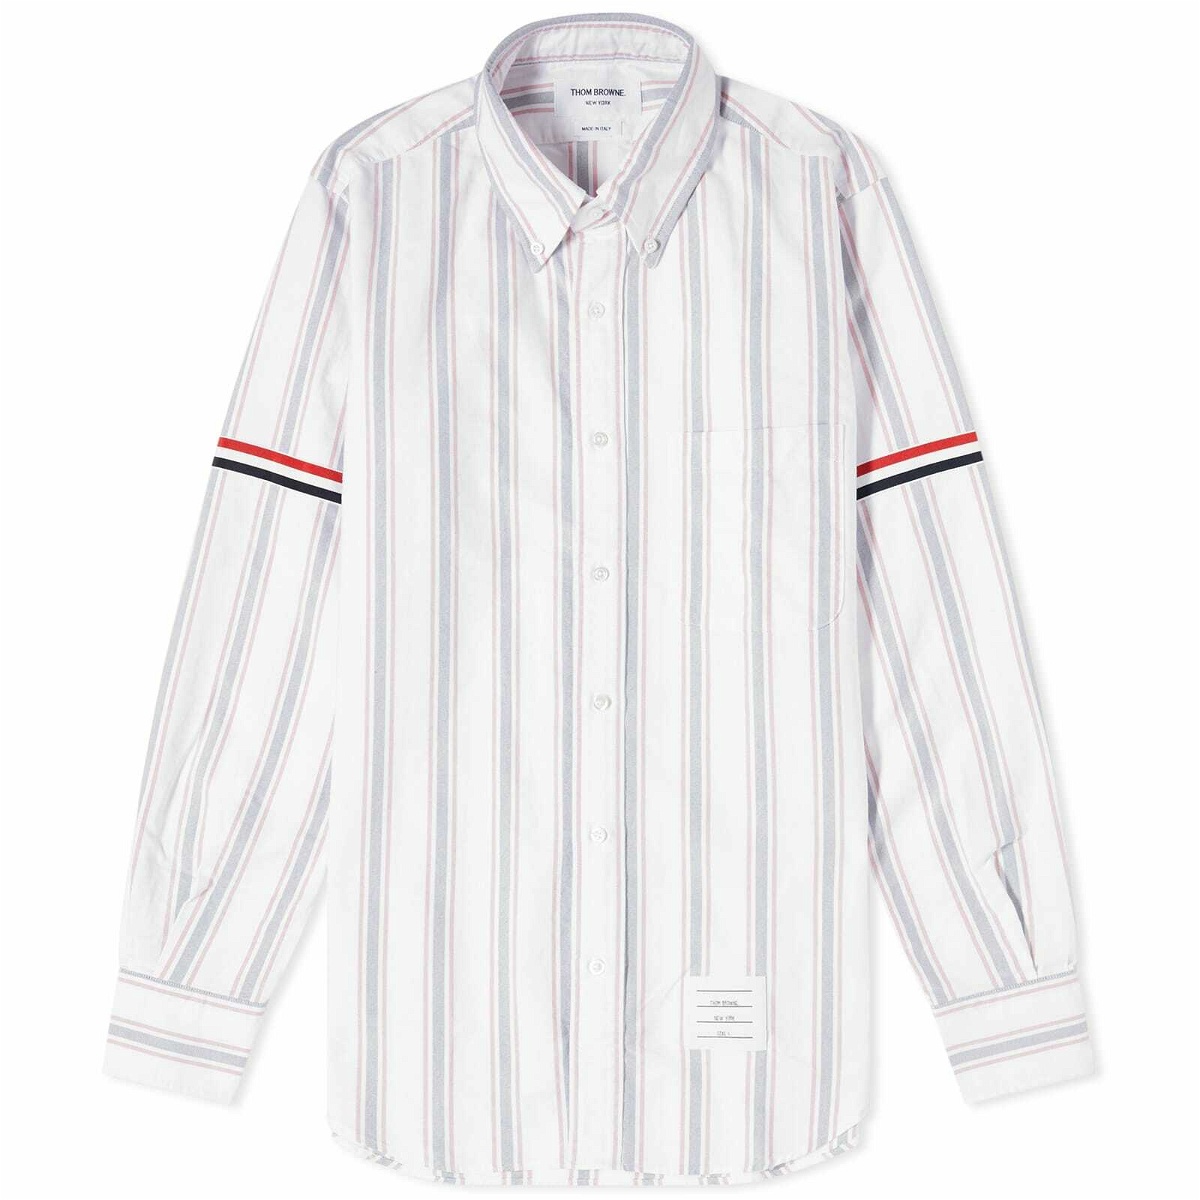 Thom Browne Men's Stripe Button Down Oxford Shirt in White/Blue/Red ...